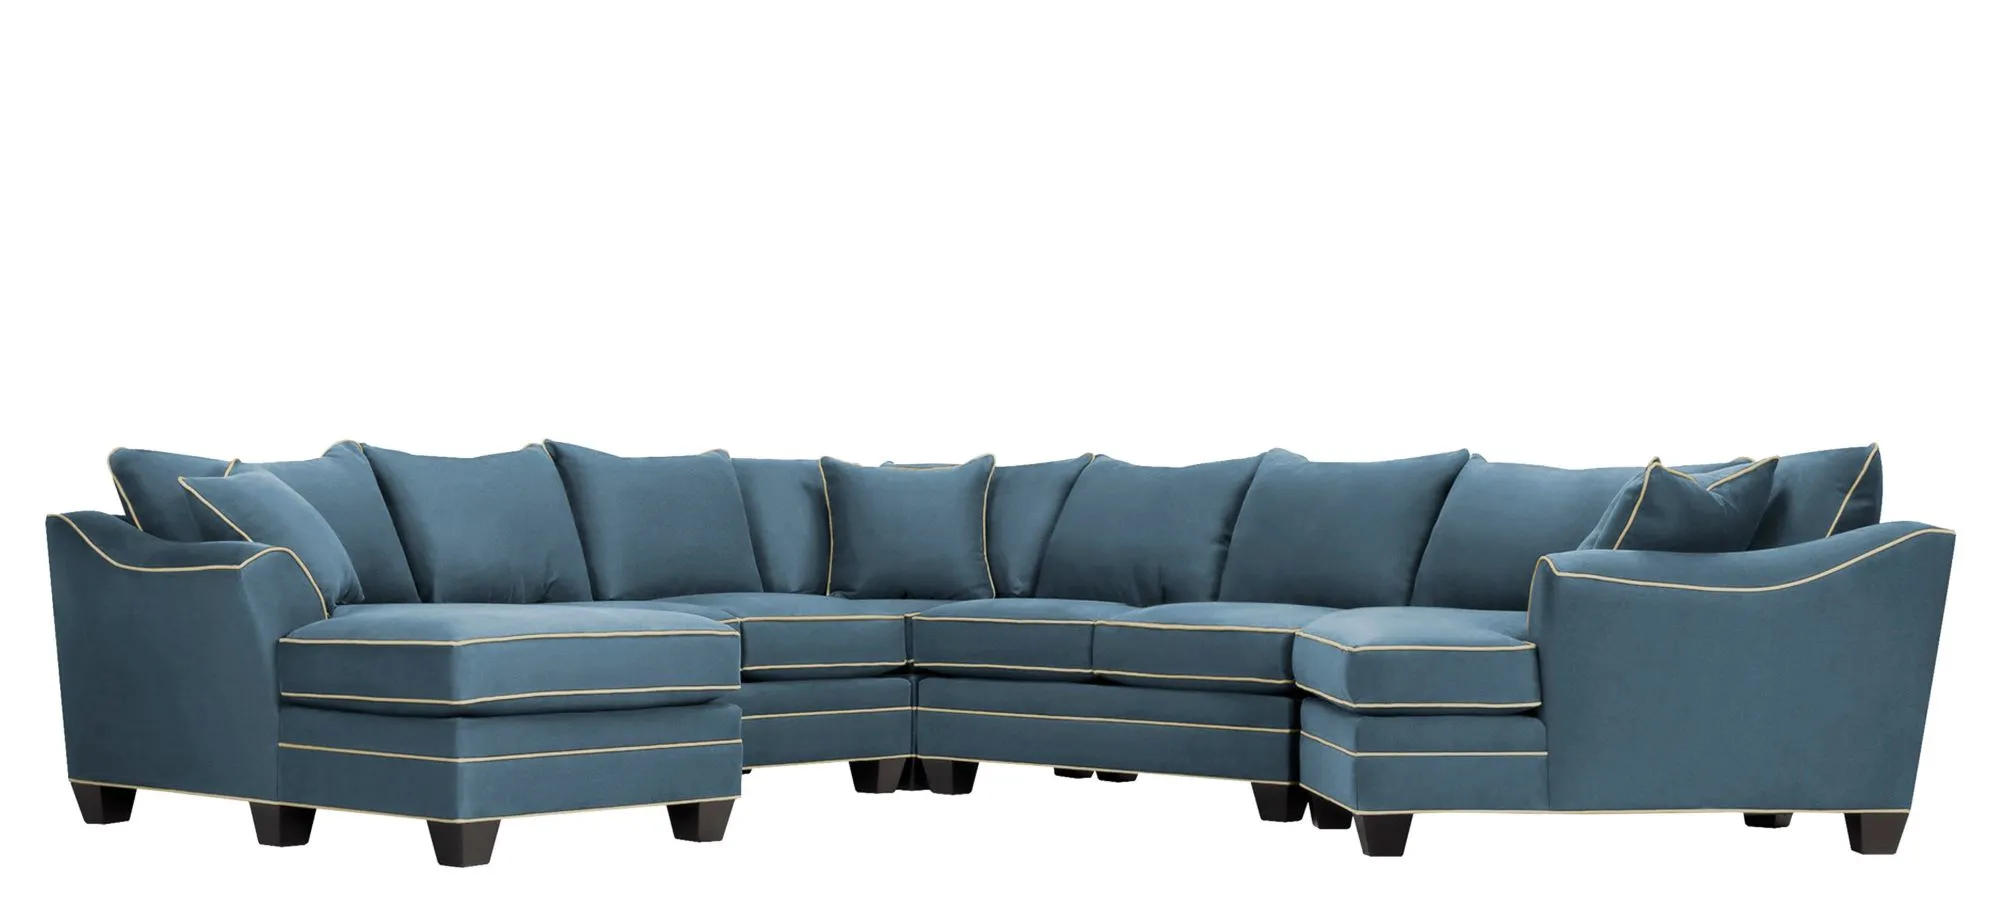 Foresthill 5-pc. Left Hand Facing Sectional Sofa in Suede So Soft Indigo/Mineral by H.M. Richards